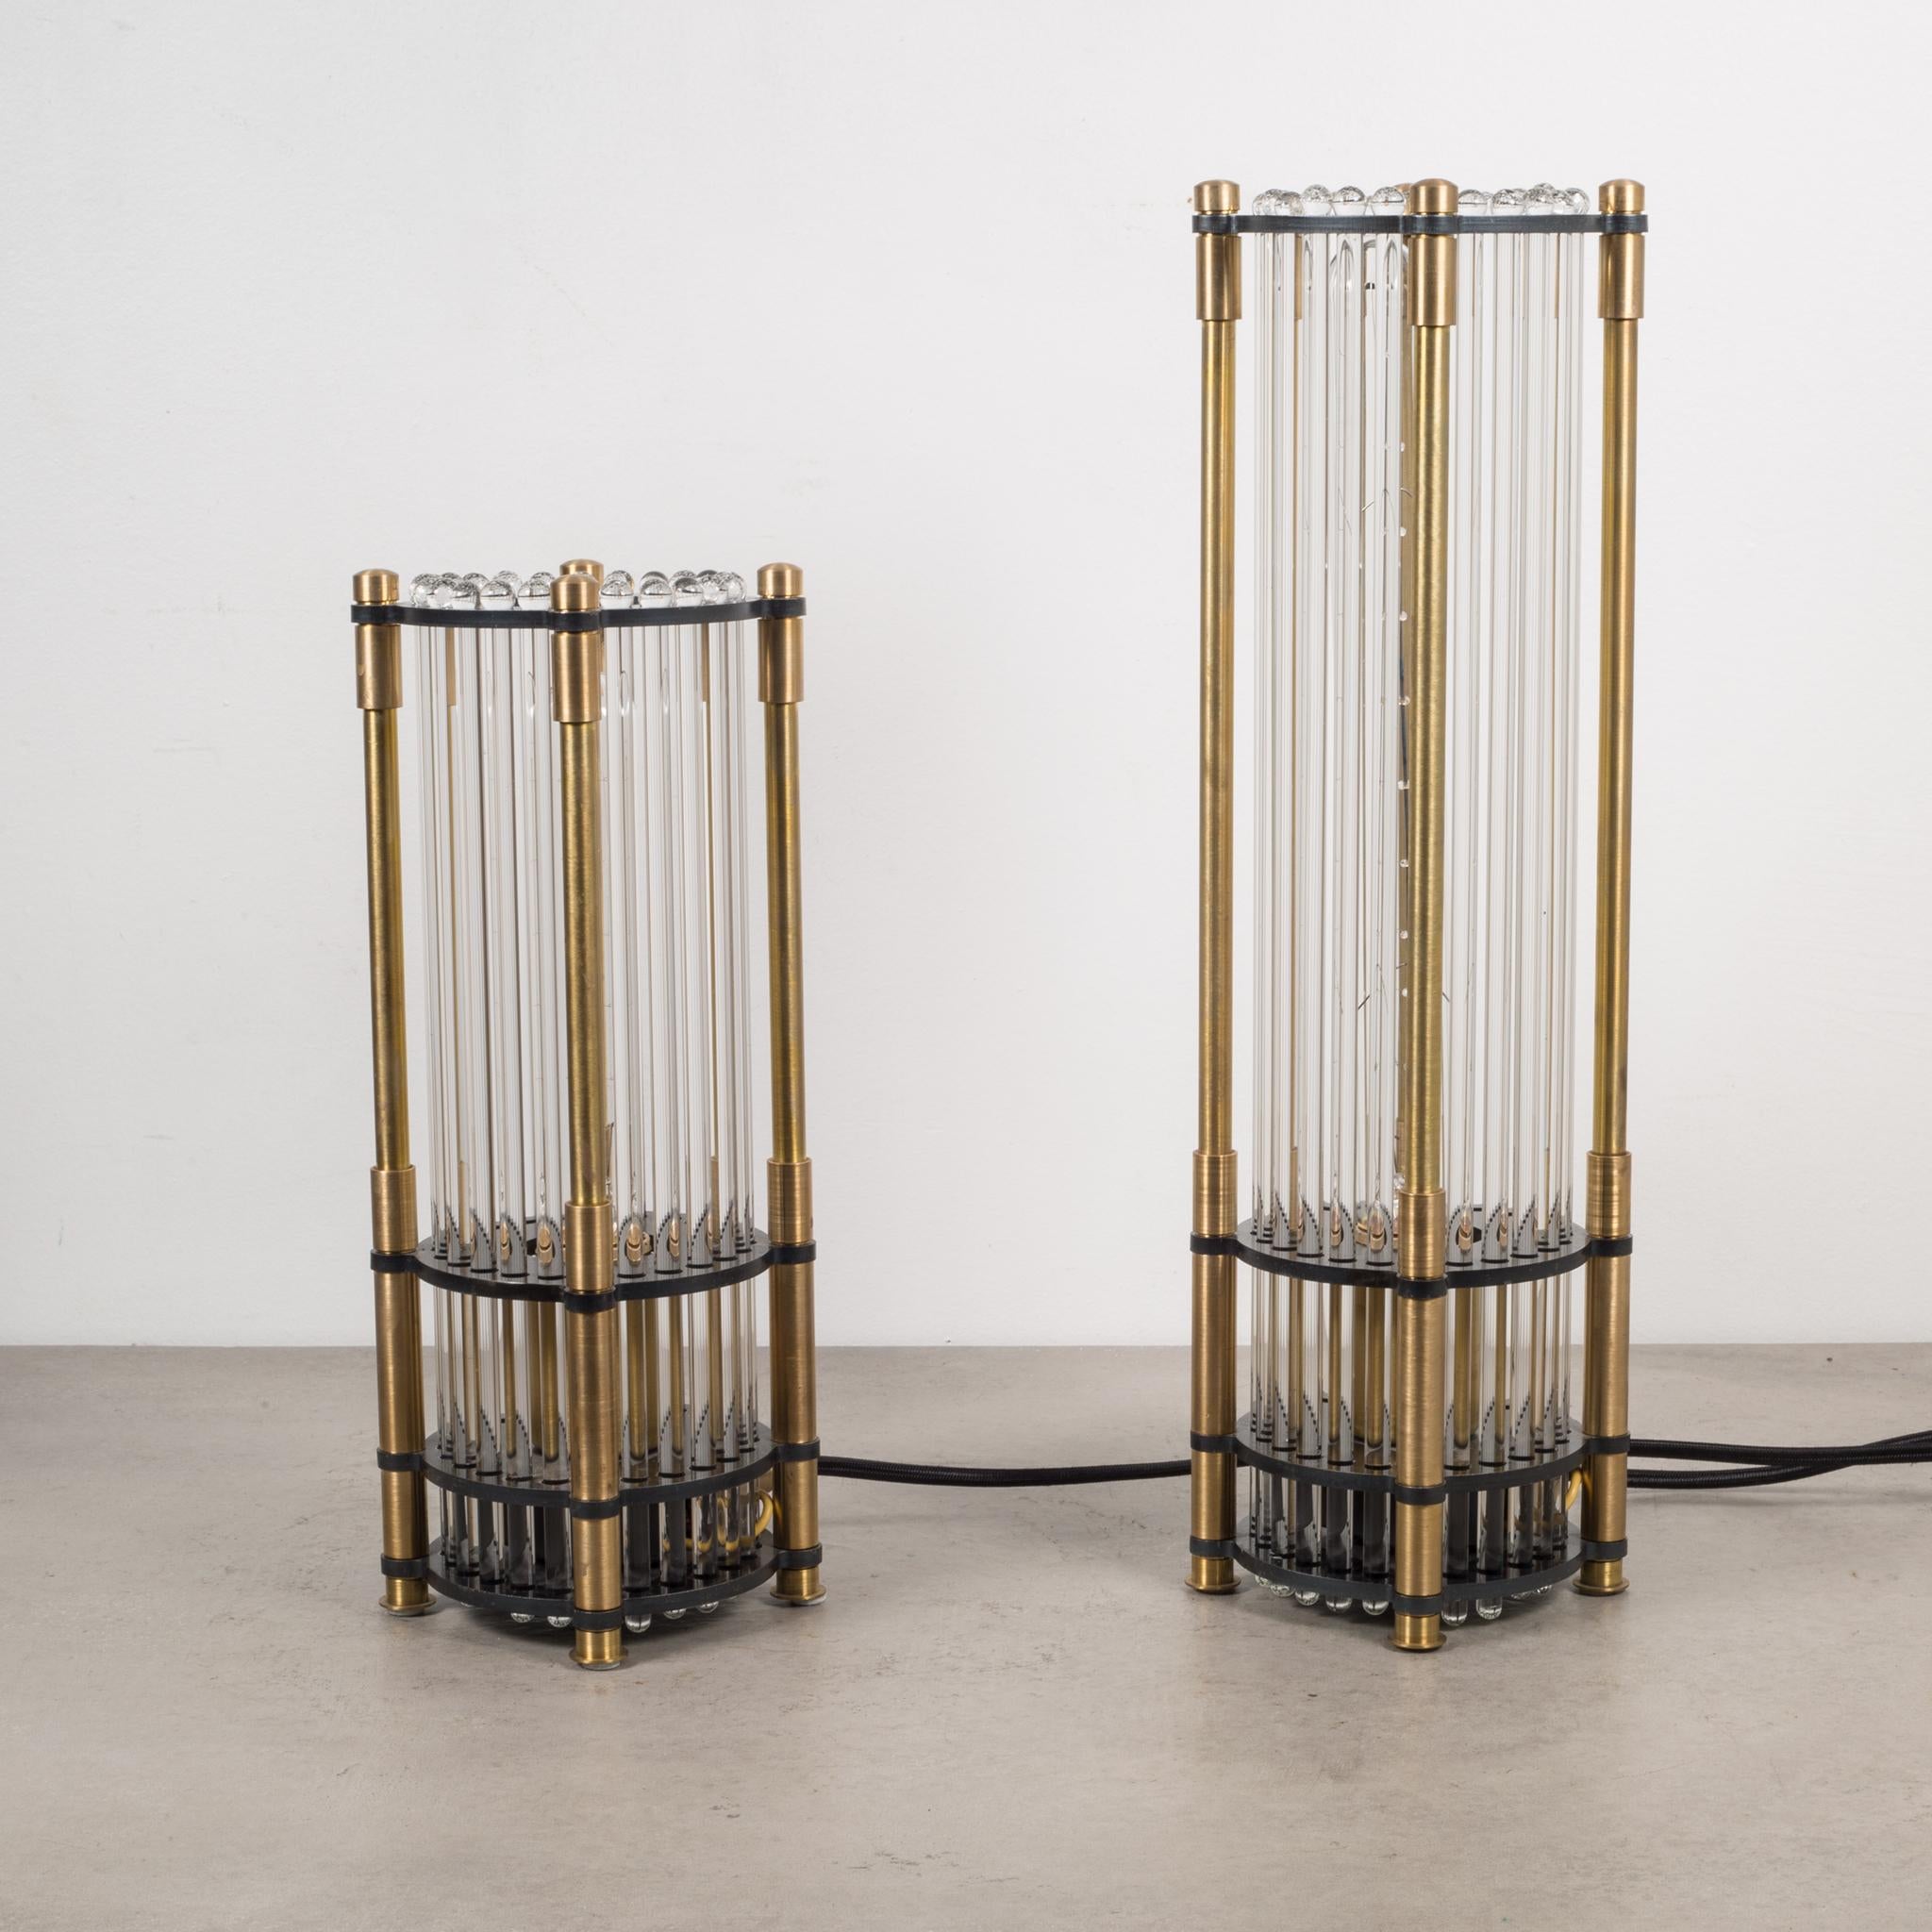 About:

Solid brass touch sensitive table lamps with glass rods and black accents. Three settings of warm light at your fingertips.

The medium light has sold. The large one is available. 

(Retailed for $885 and $775)

Creator: Jay Jeffers for